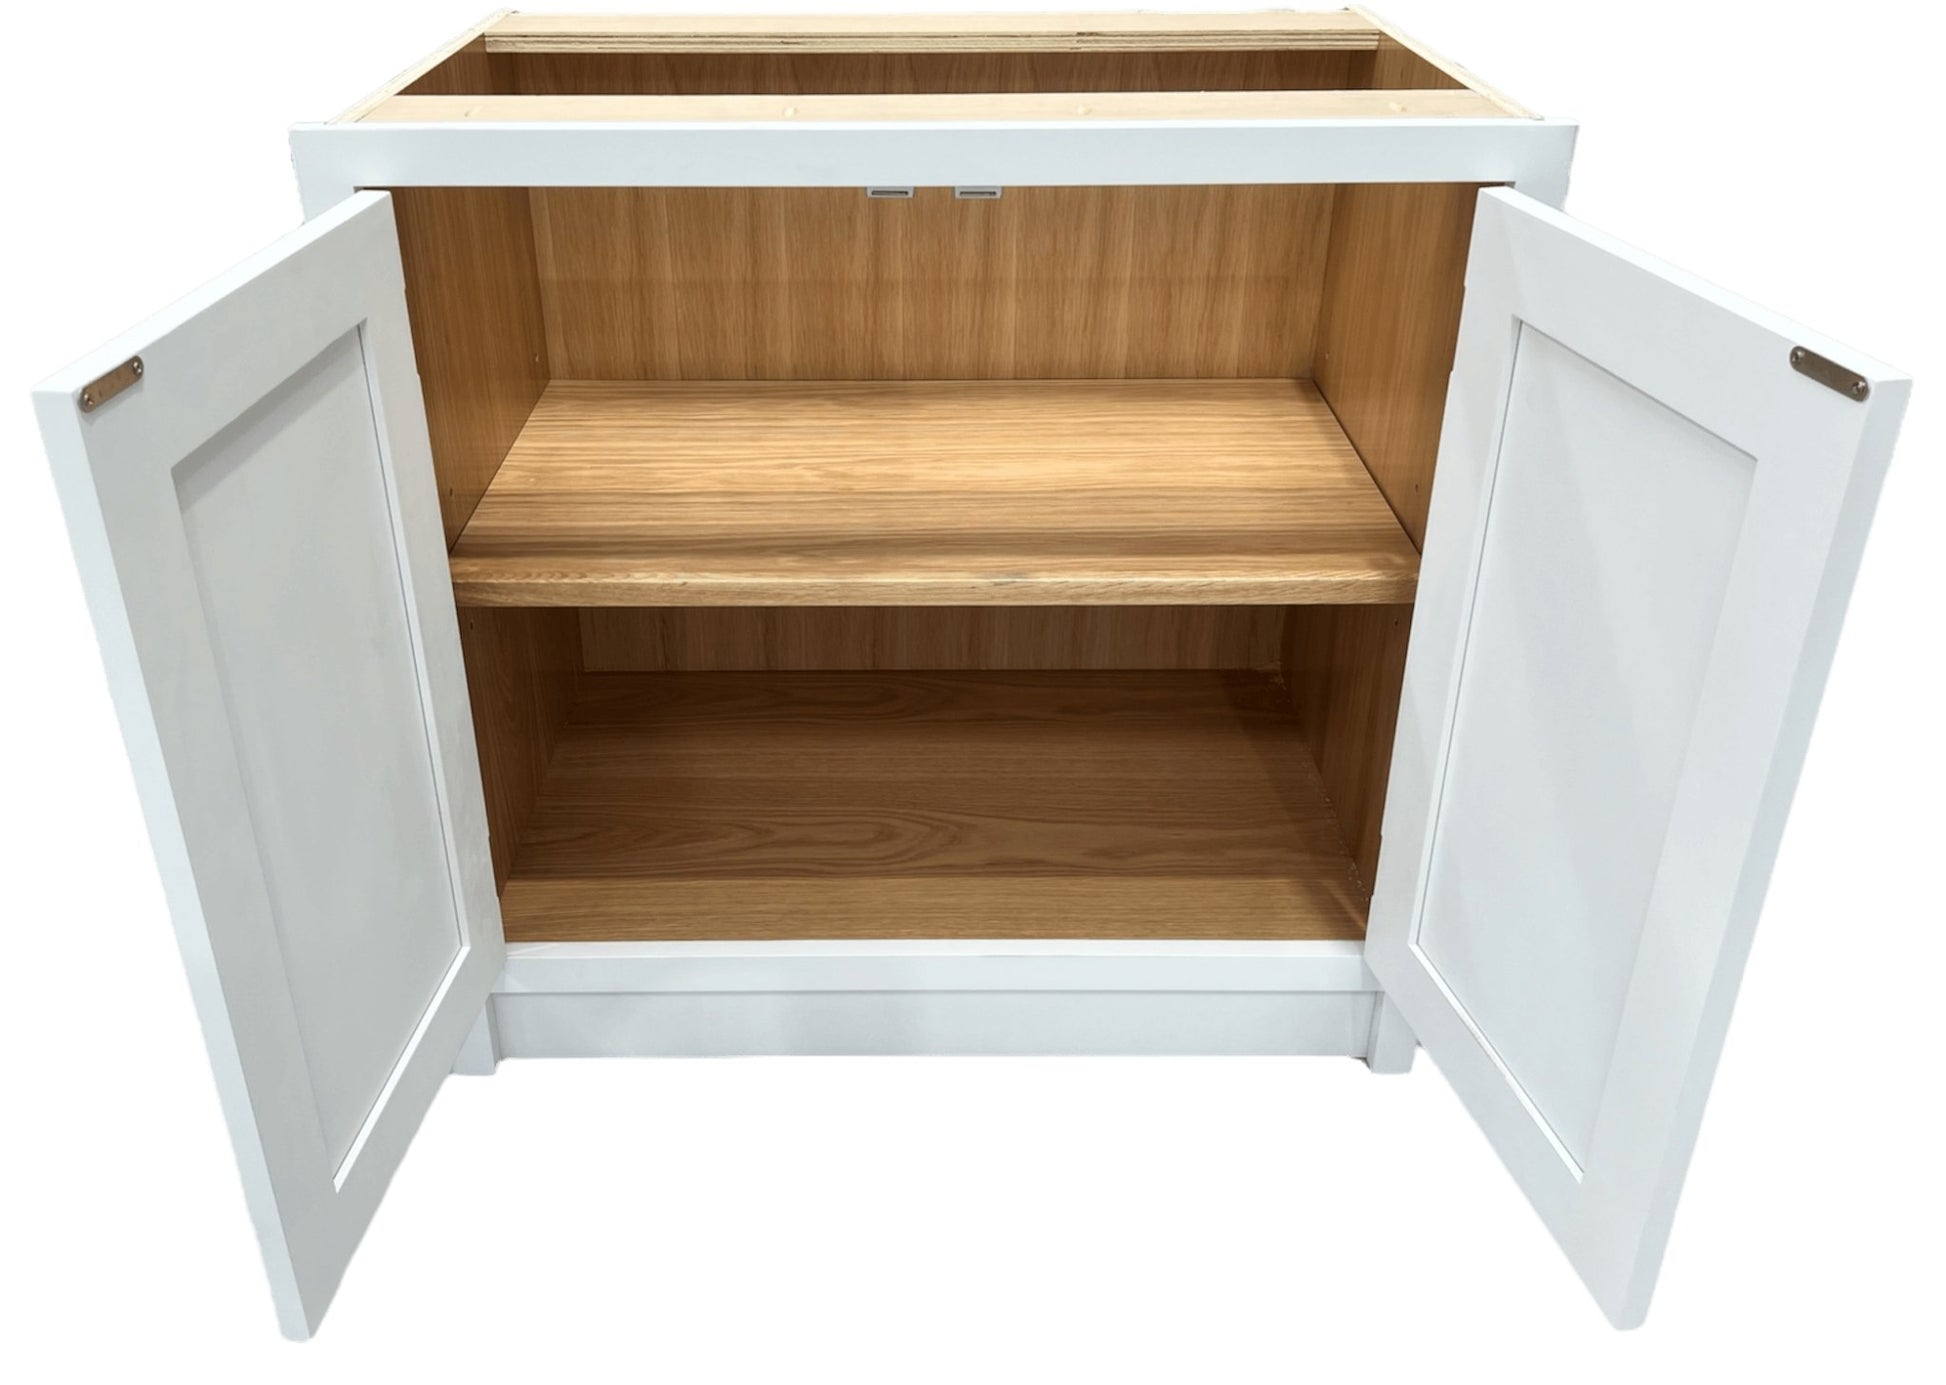 BH 1200 - 1200mm Highline double door base unit - Classic Kitchens Direct